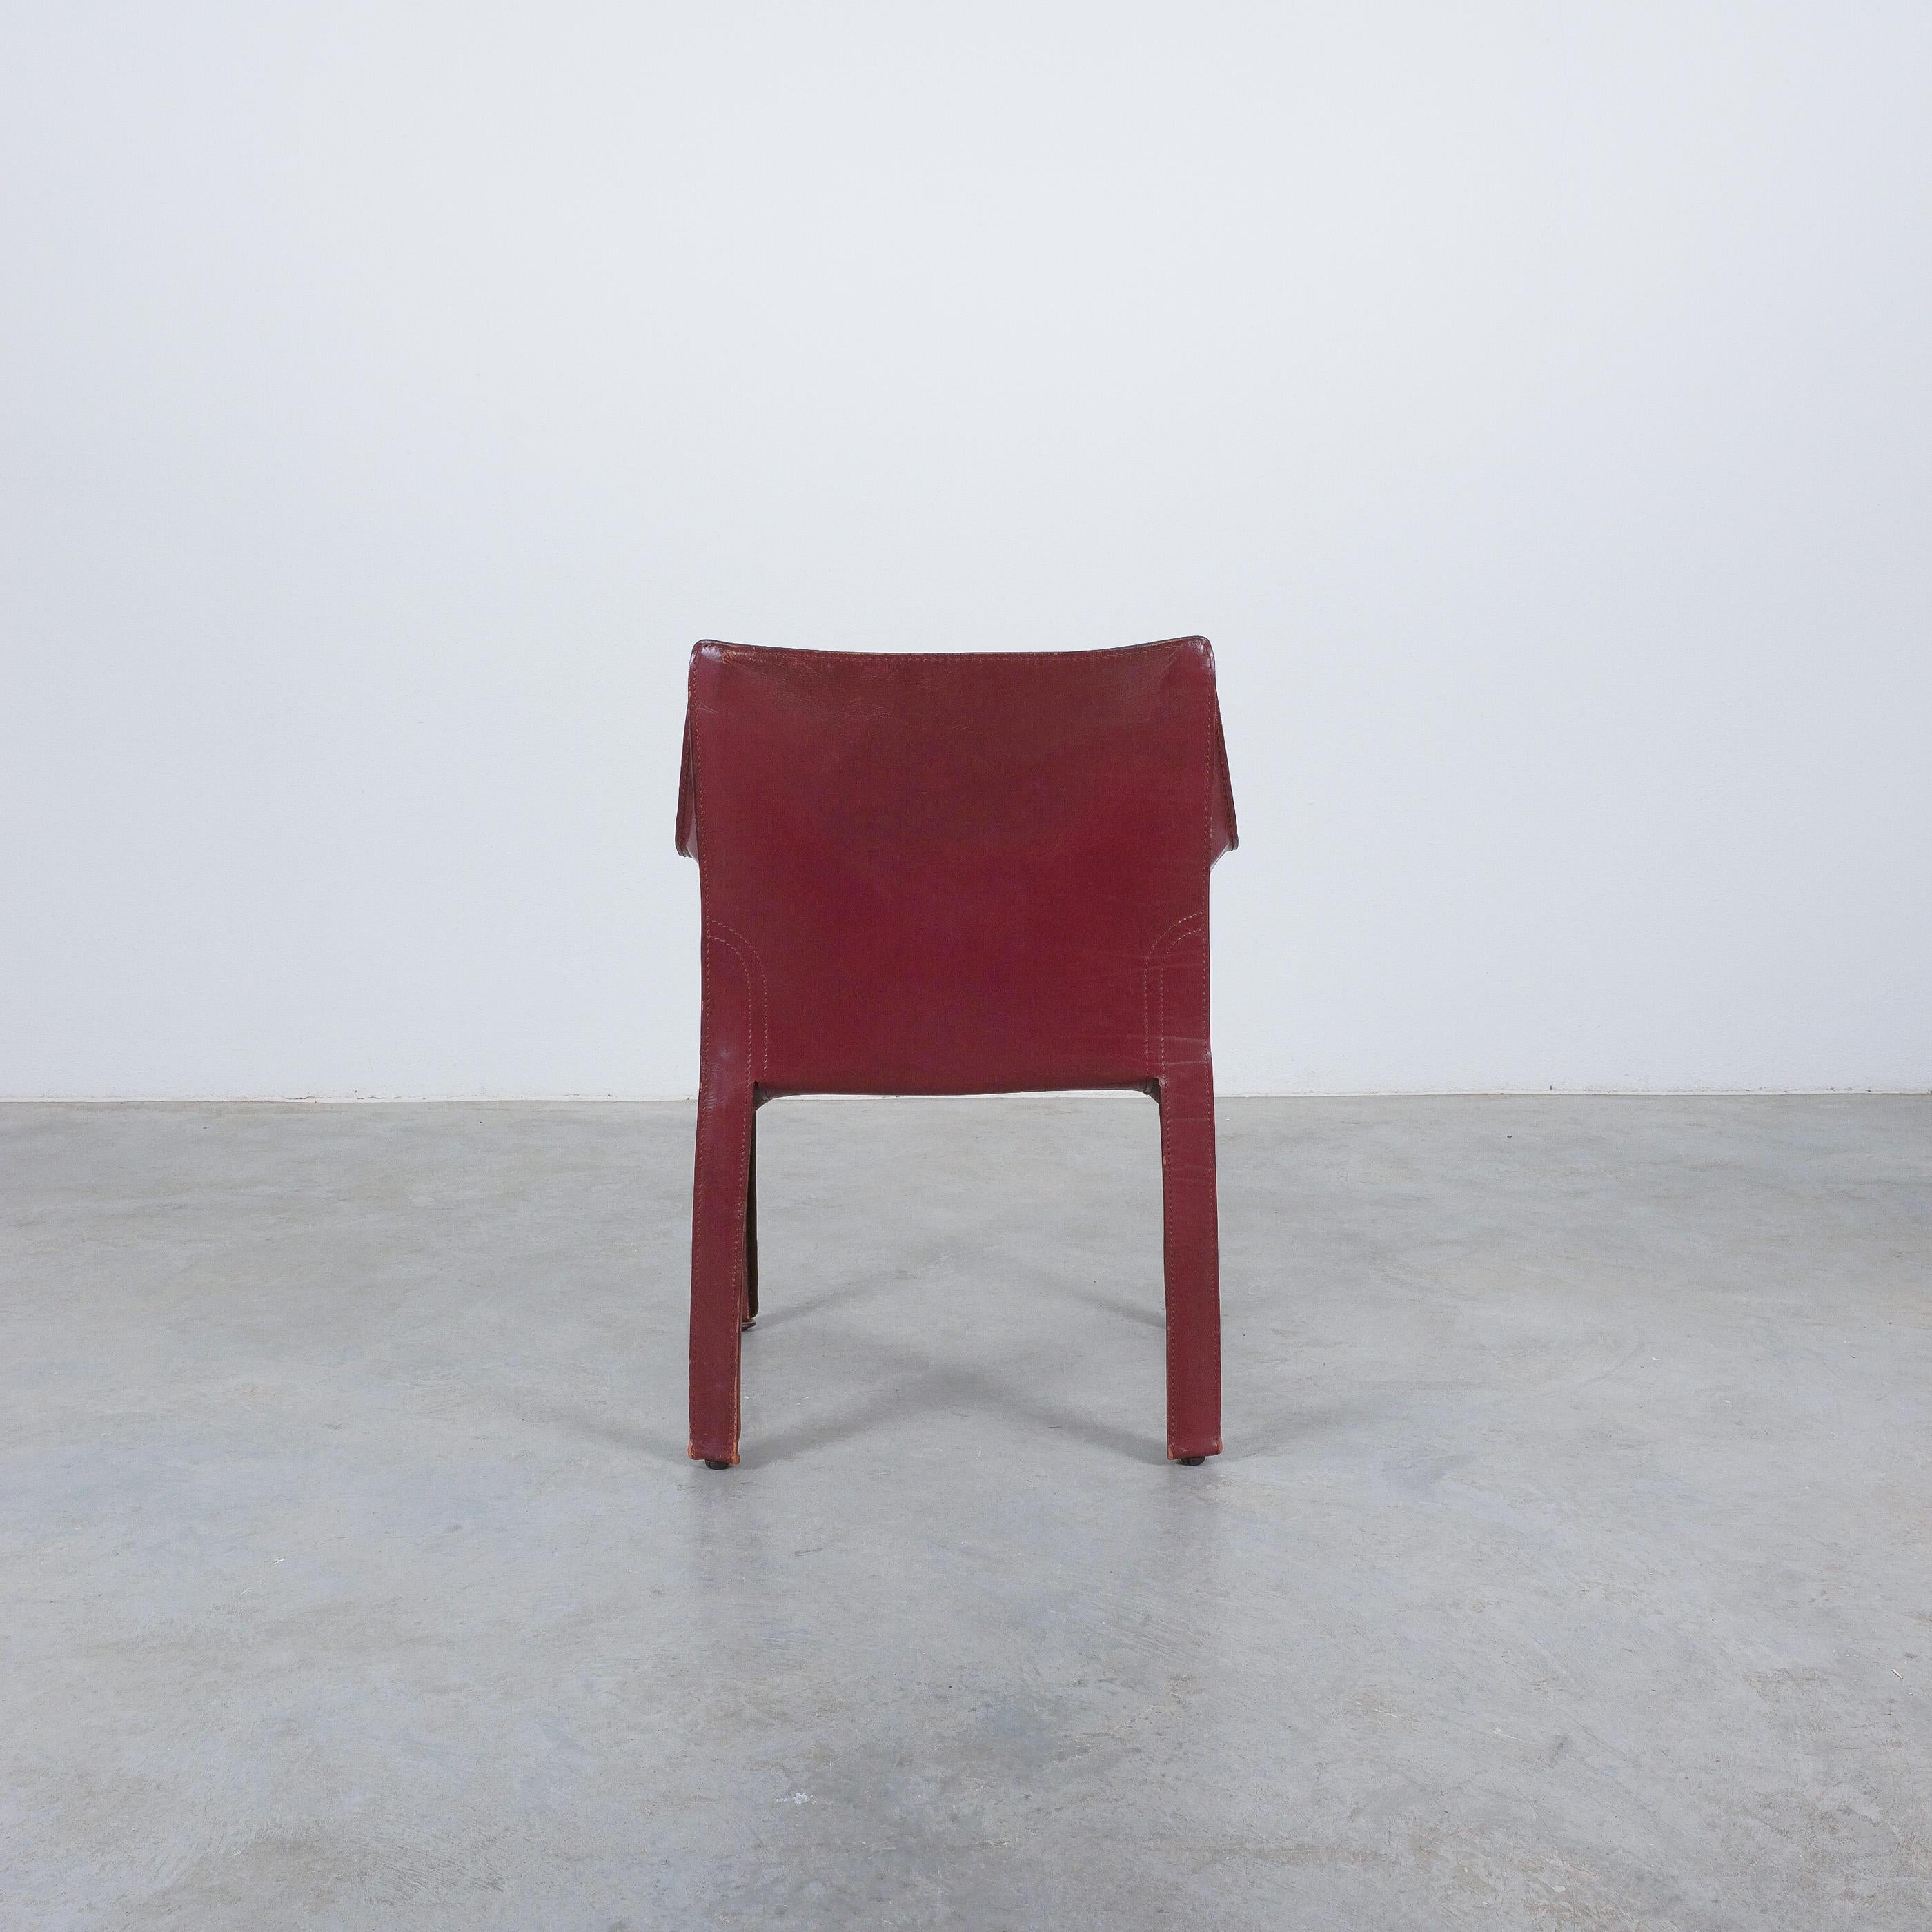 Mario Bellini Cassina Cab 413 Burgundy Red Leather Dining Chairs, 1980 For Sale 3